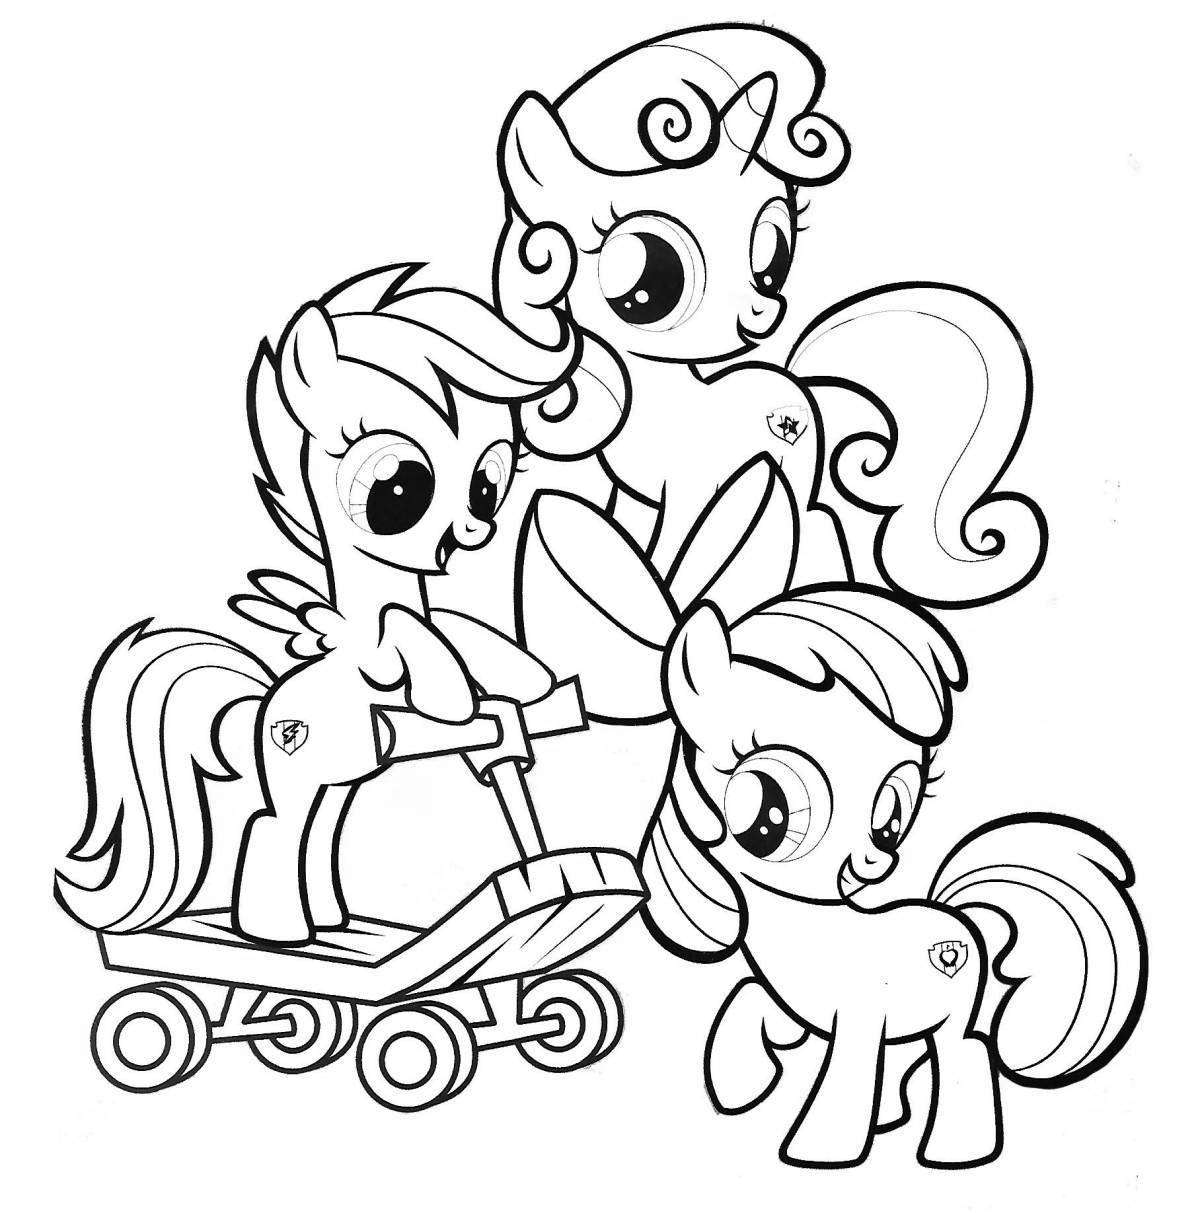 Great pony coloring page